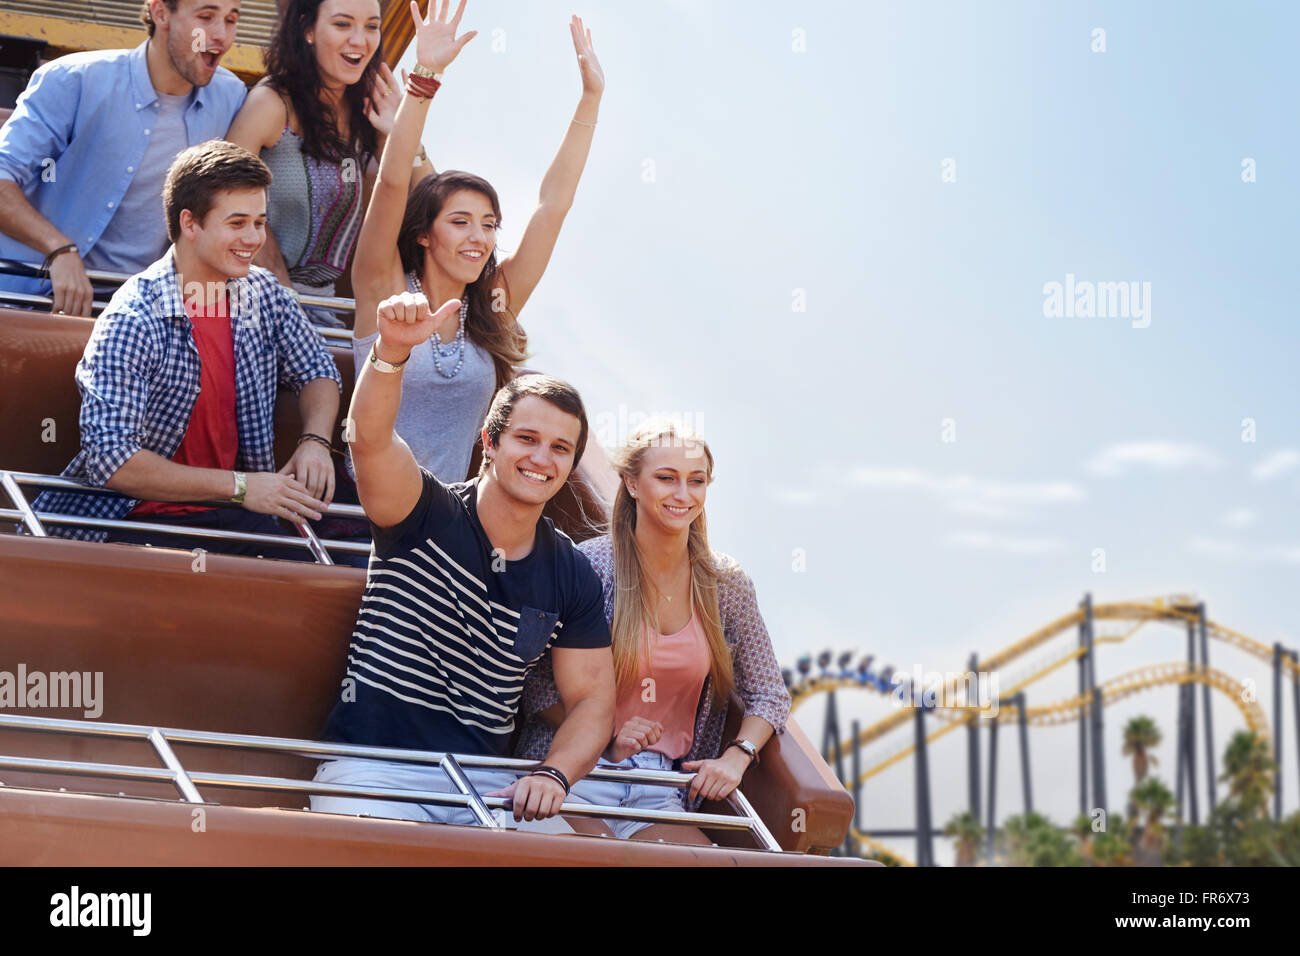 Portrait young man giving thumbs-up on amusement park ride Stock Photo